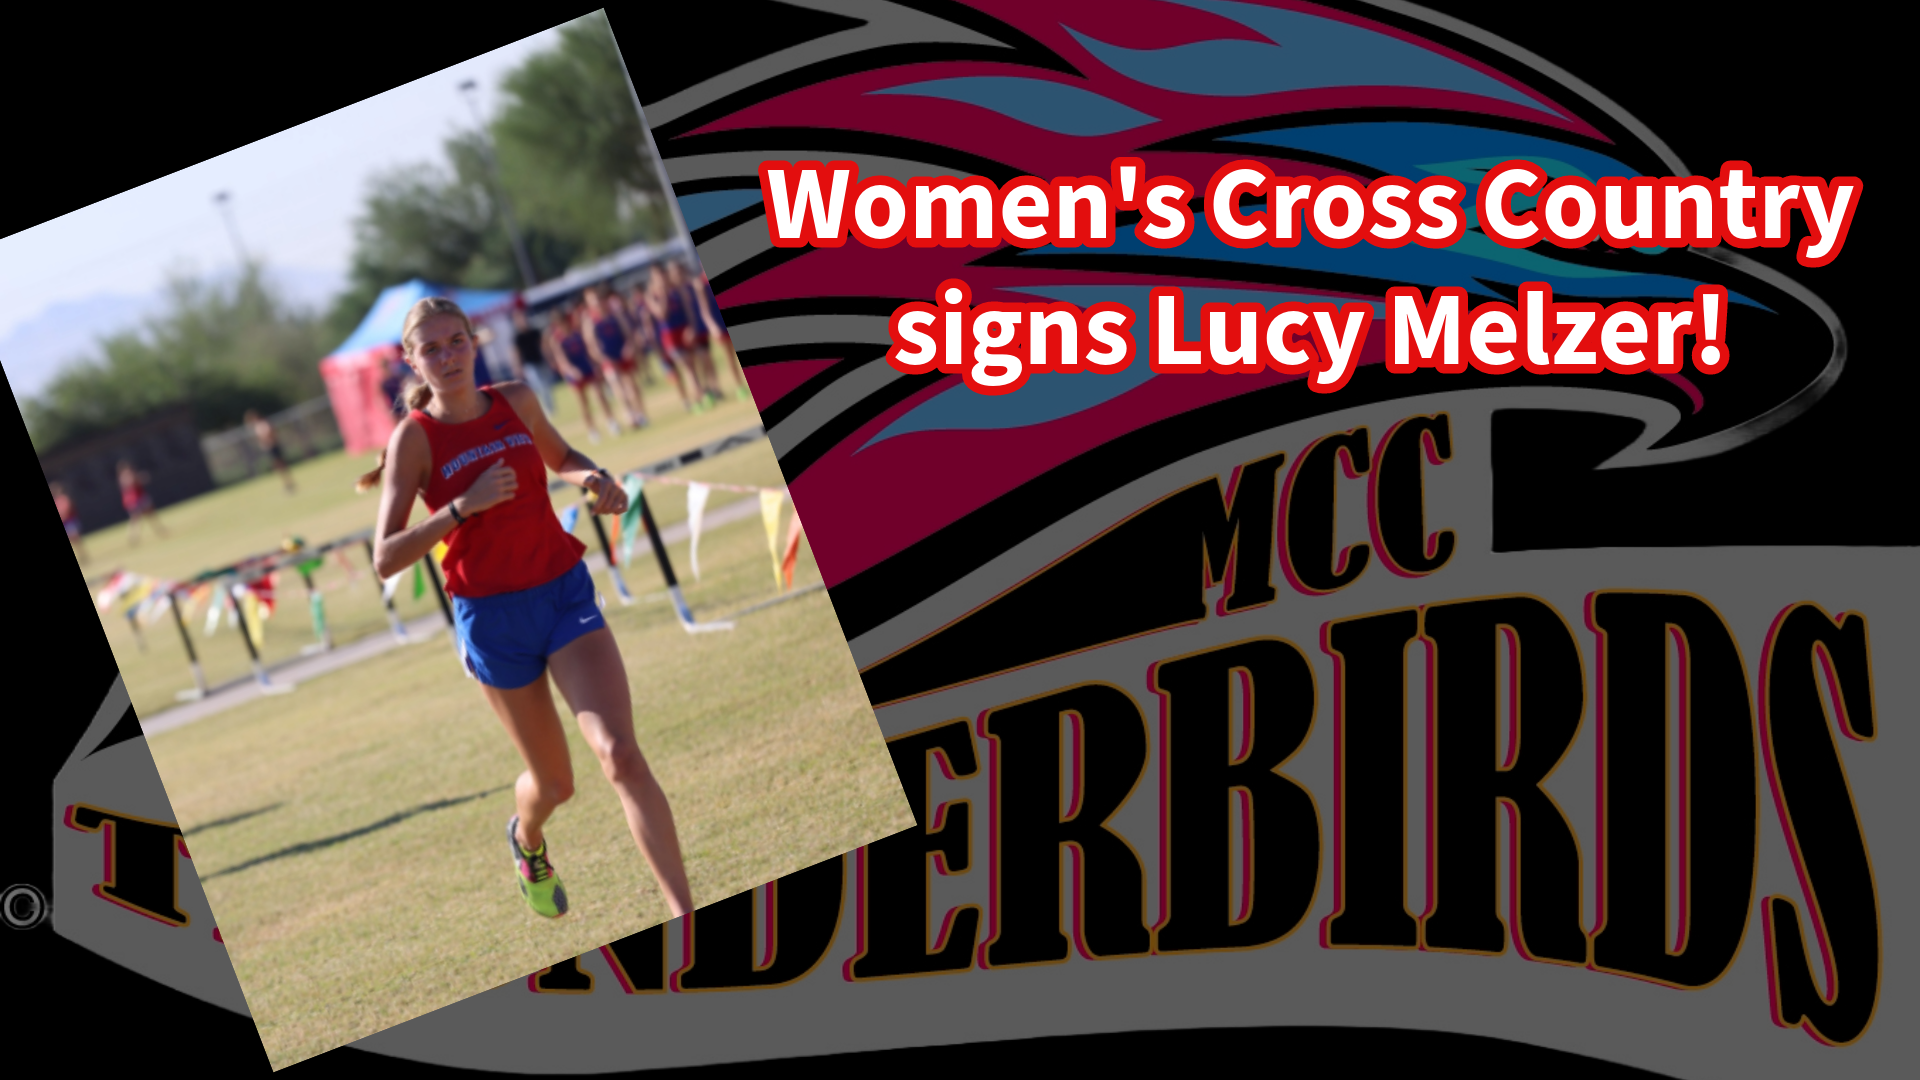 Women's Cross Country signs Lucy Melzer